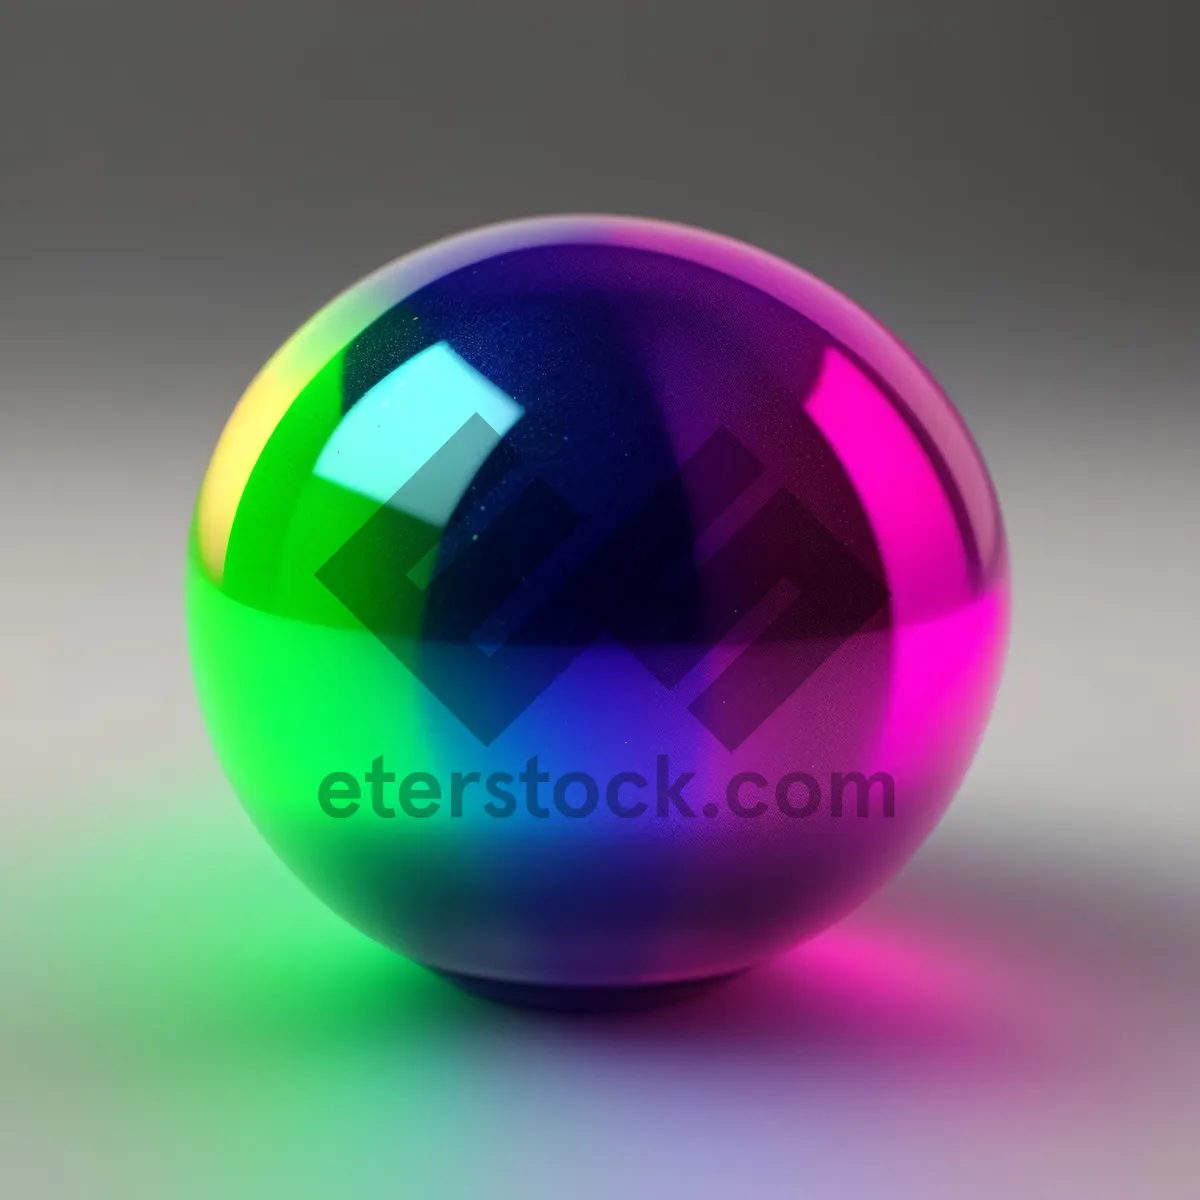 Picture of Glossy Glass Button Sphere with Bright Reflection